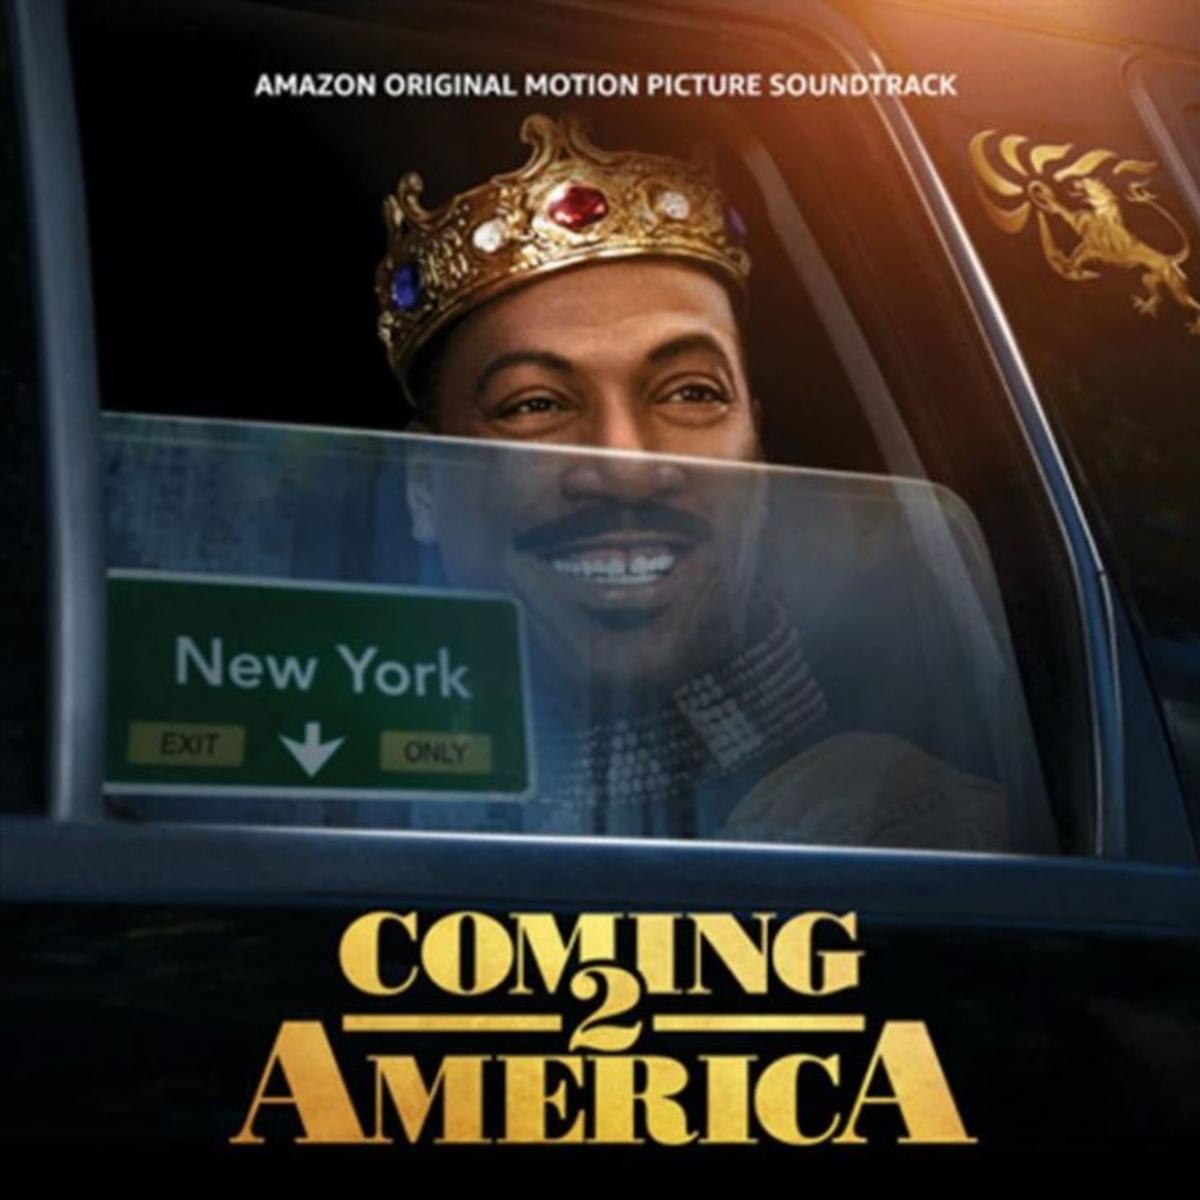 Listen To The “Coming 2 America” Soundtrack